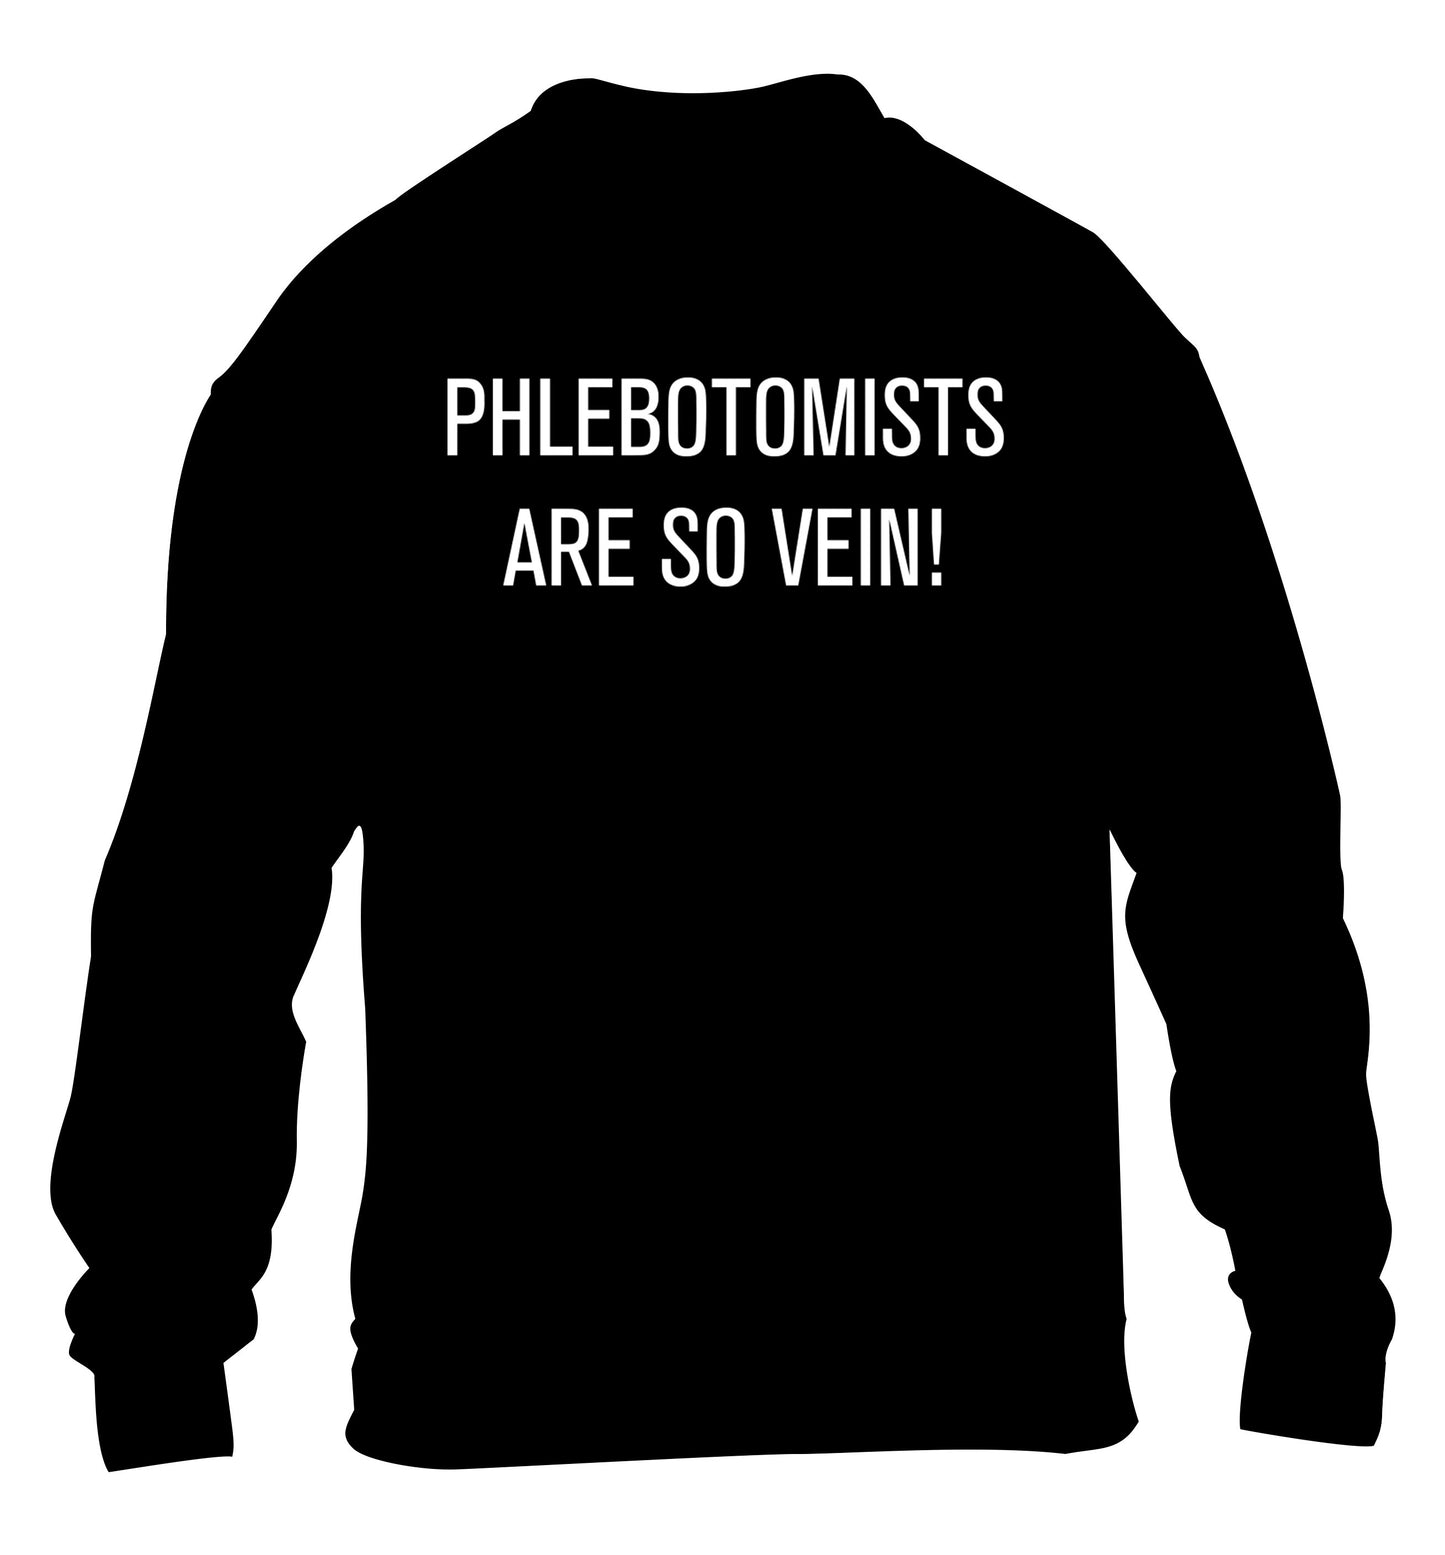 Phlebotomists are so vein! children's black sweater 12-14 Years